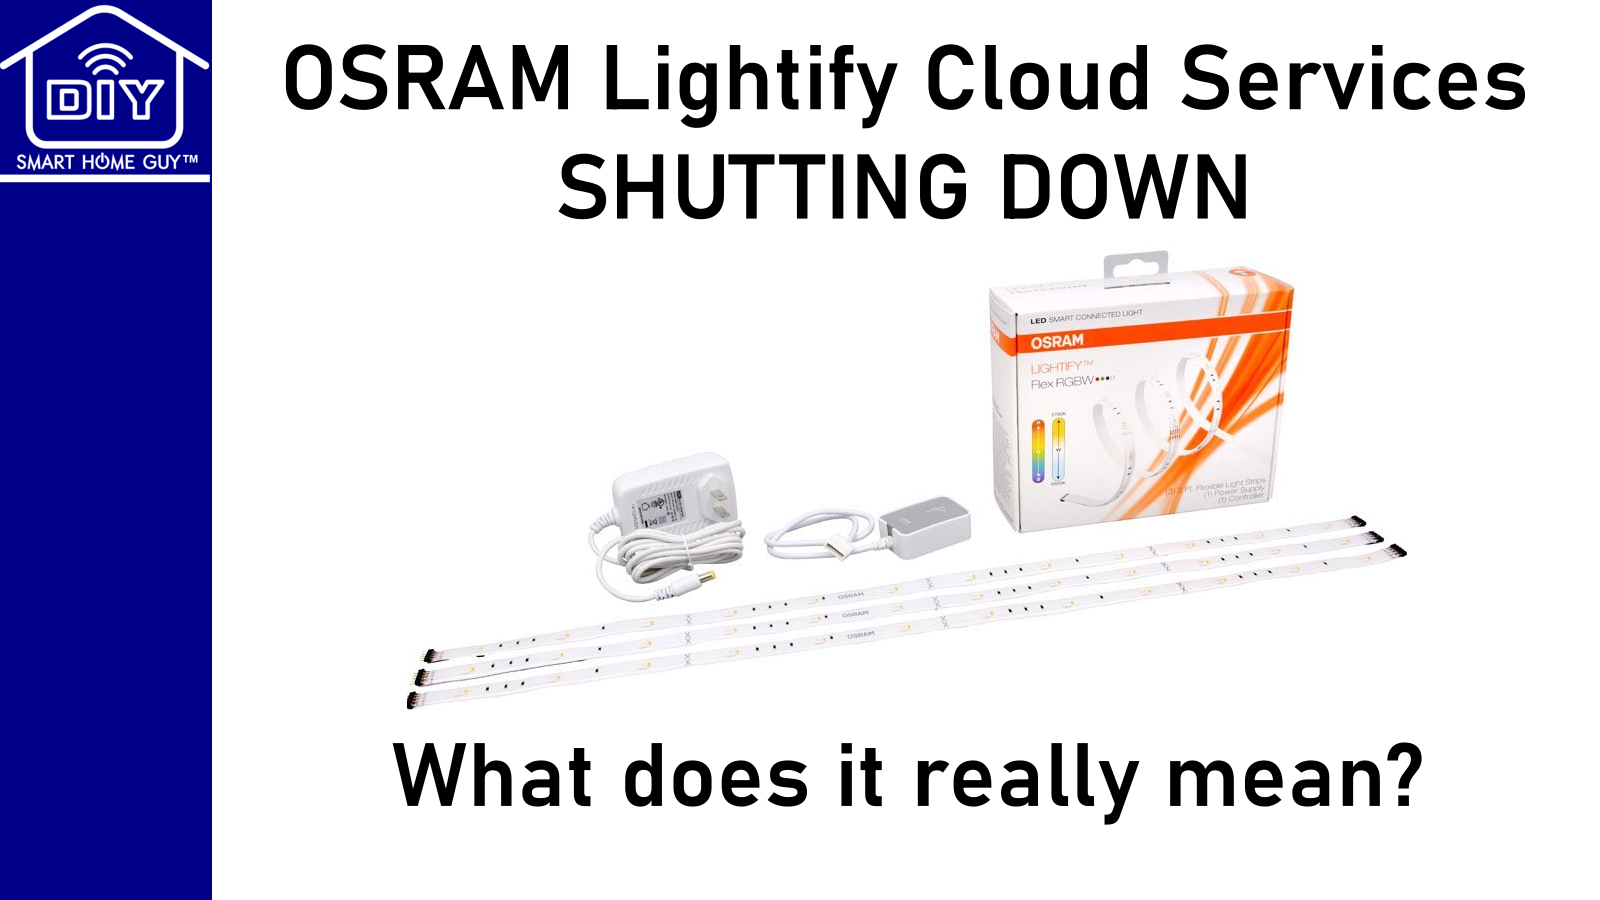 Osram says it's turning off cloud servers for Lightify smart bulbs